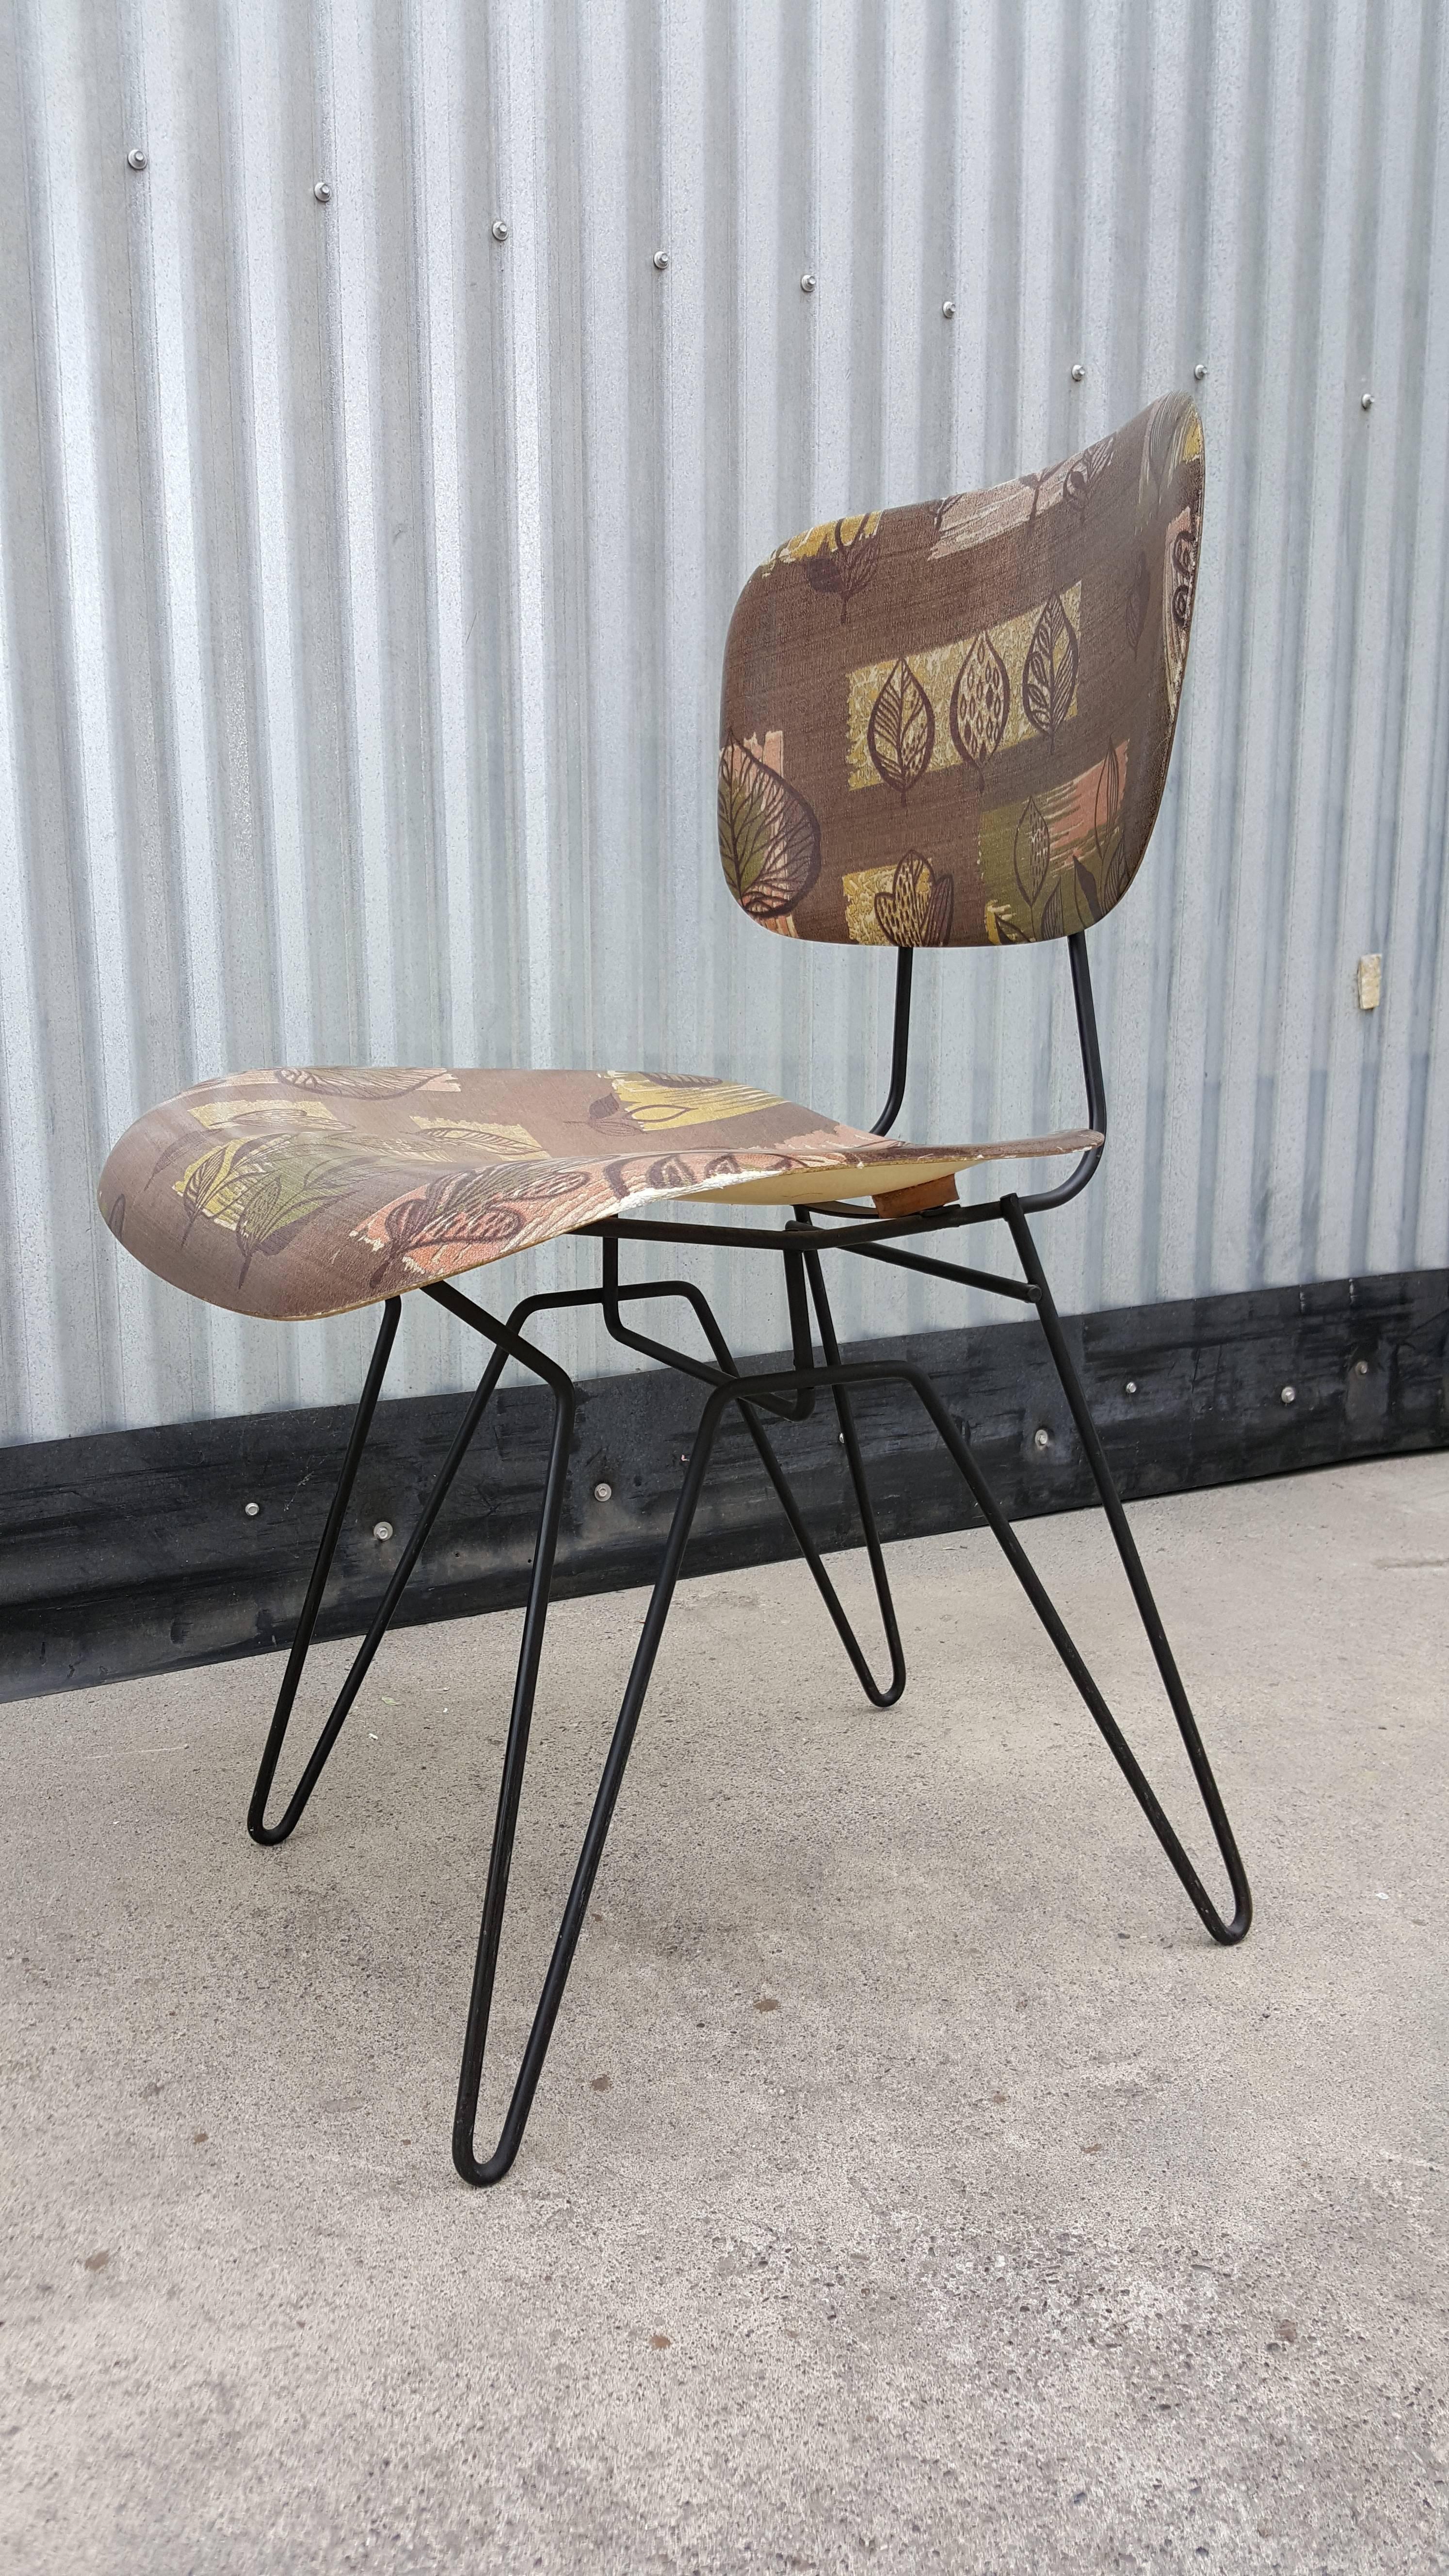 Hobart Wells Iron Hairpin and Formed Fiberglass Lounge Chair In Good Condition For Sale In Fulton, CA